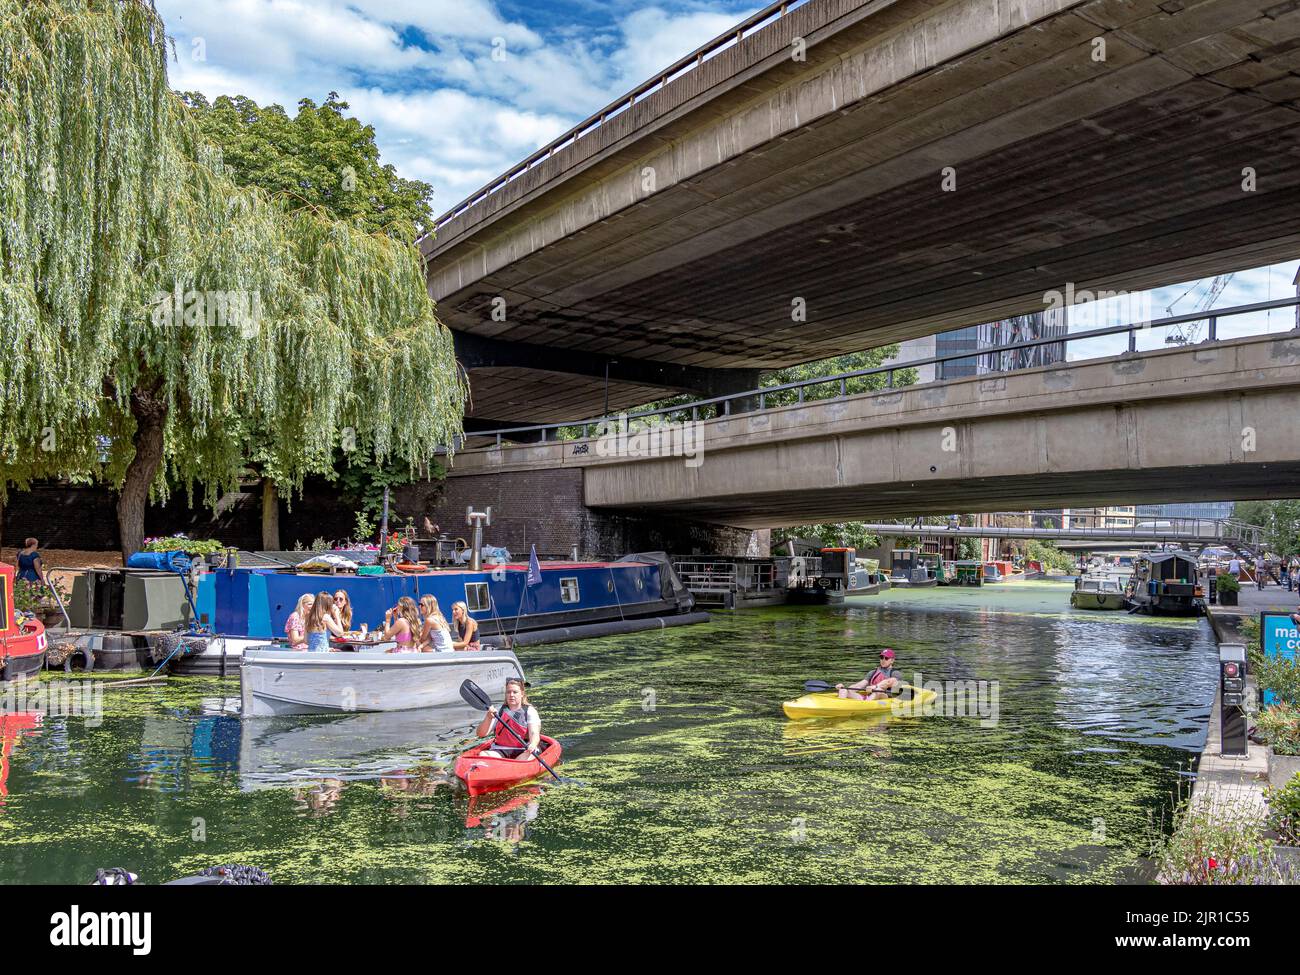 People in kayaks and a group of girl in a boat passing under the Westway on the Paddington arm of the Grand Union Canal , Paddington ,London, W2 Stock Photo